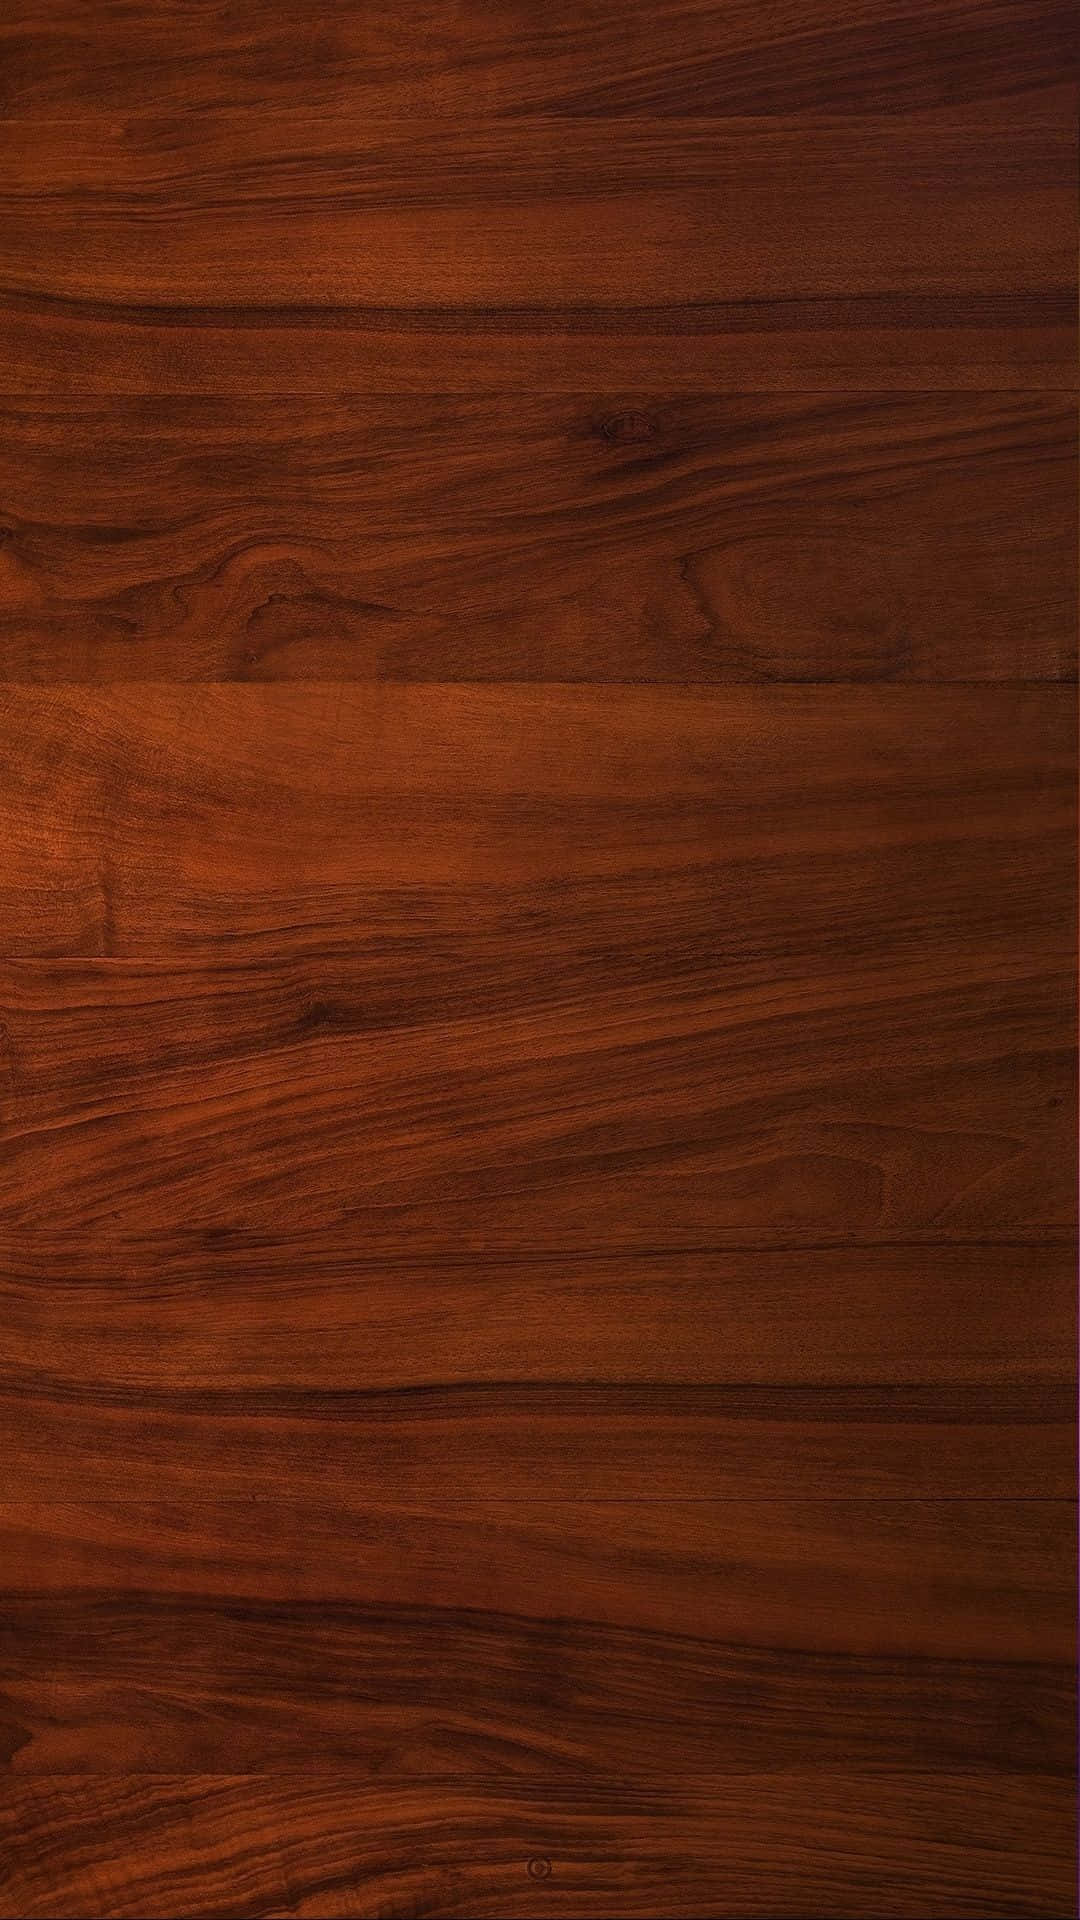 A Close Up Of A Wooden Background